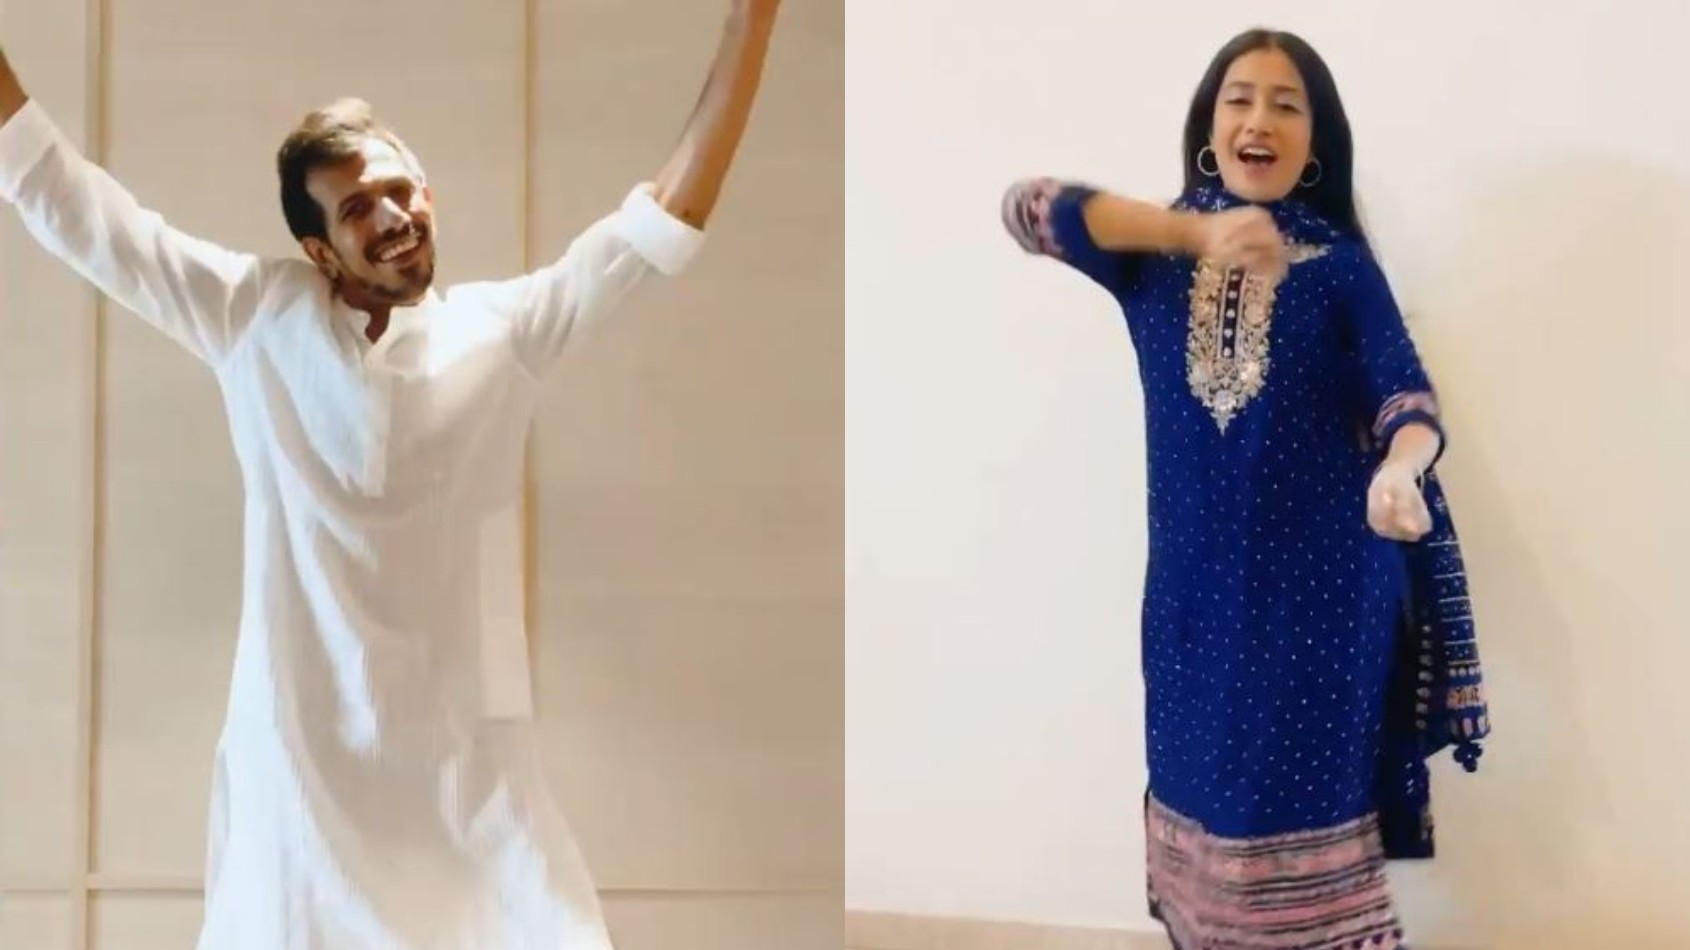 WATCH- Yuzvendra Chahal and wife Dhanashree pay a dancing tribute on Republic Day 2021